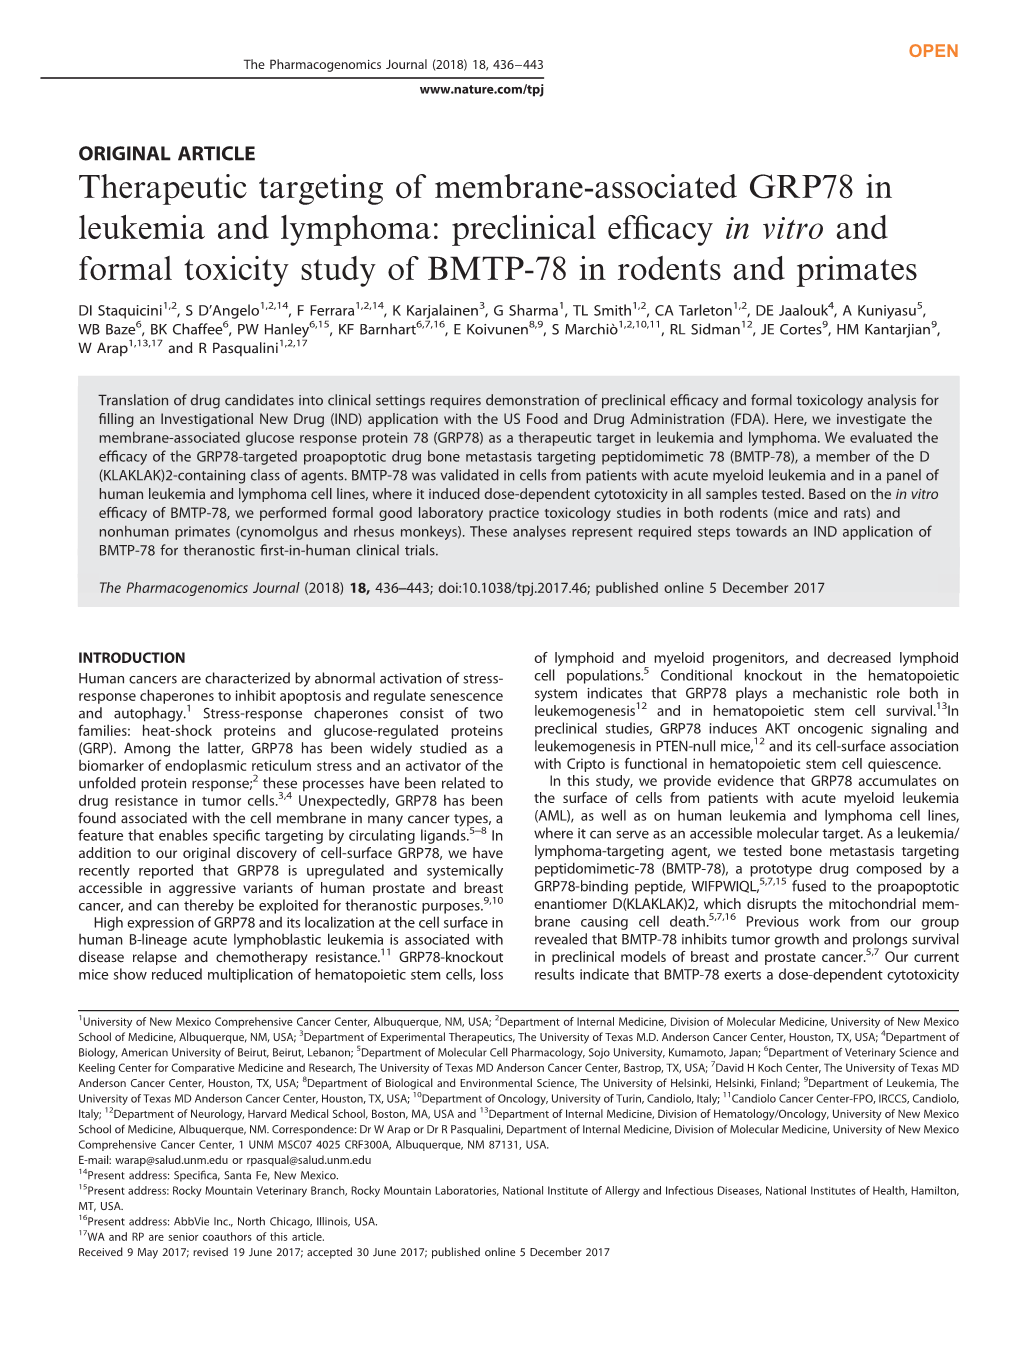 Therapeutic Targeting of Membrane-Associated GRP78 in Leukemia and Lymphoma: Preclinical Efficacy in Vitro and Formal Toxicity S